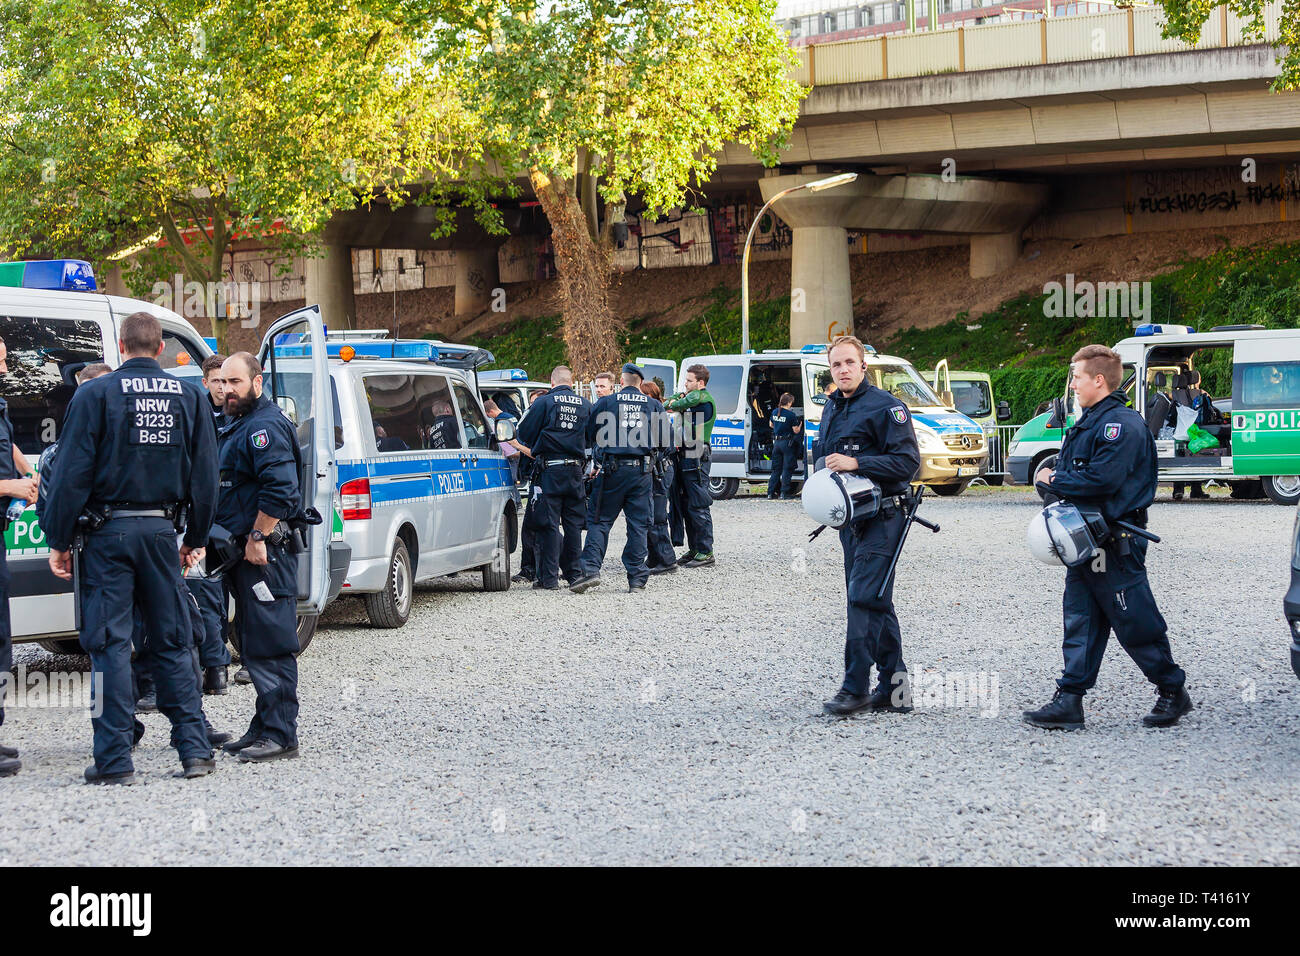 Cologne, Germany - September 24, 2016: Policemen and policewomen in an action in front of the Cologne exhibition grounds. Stock Photo